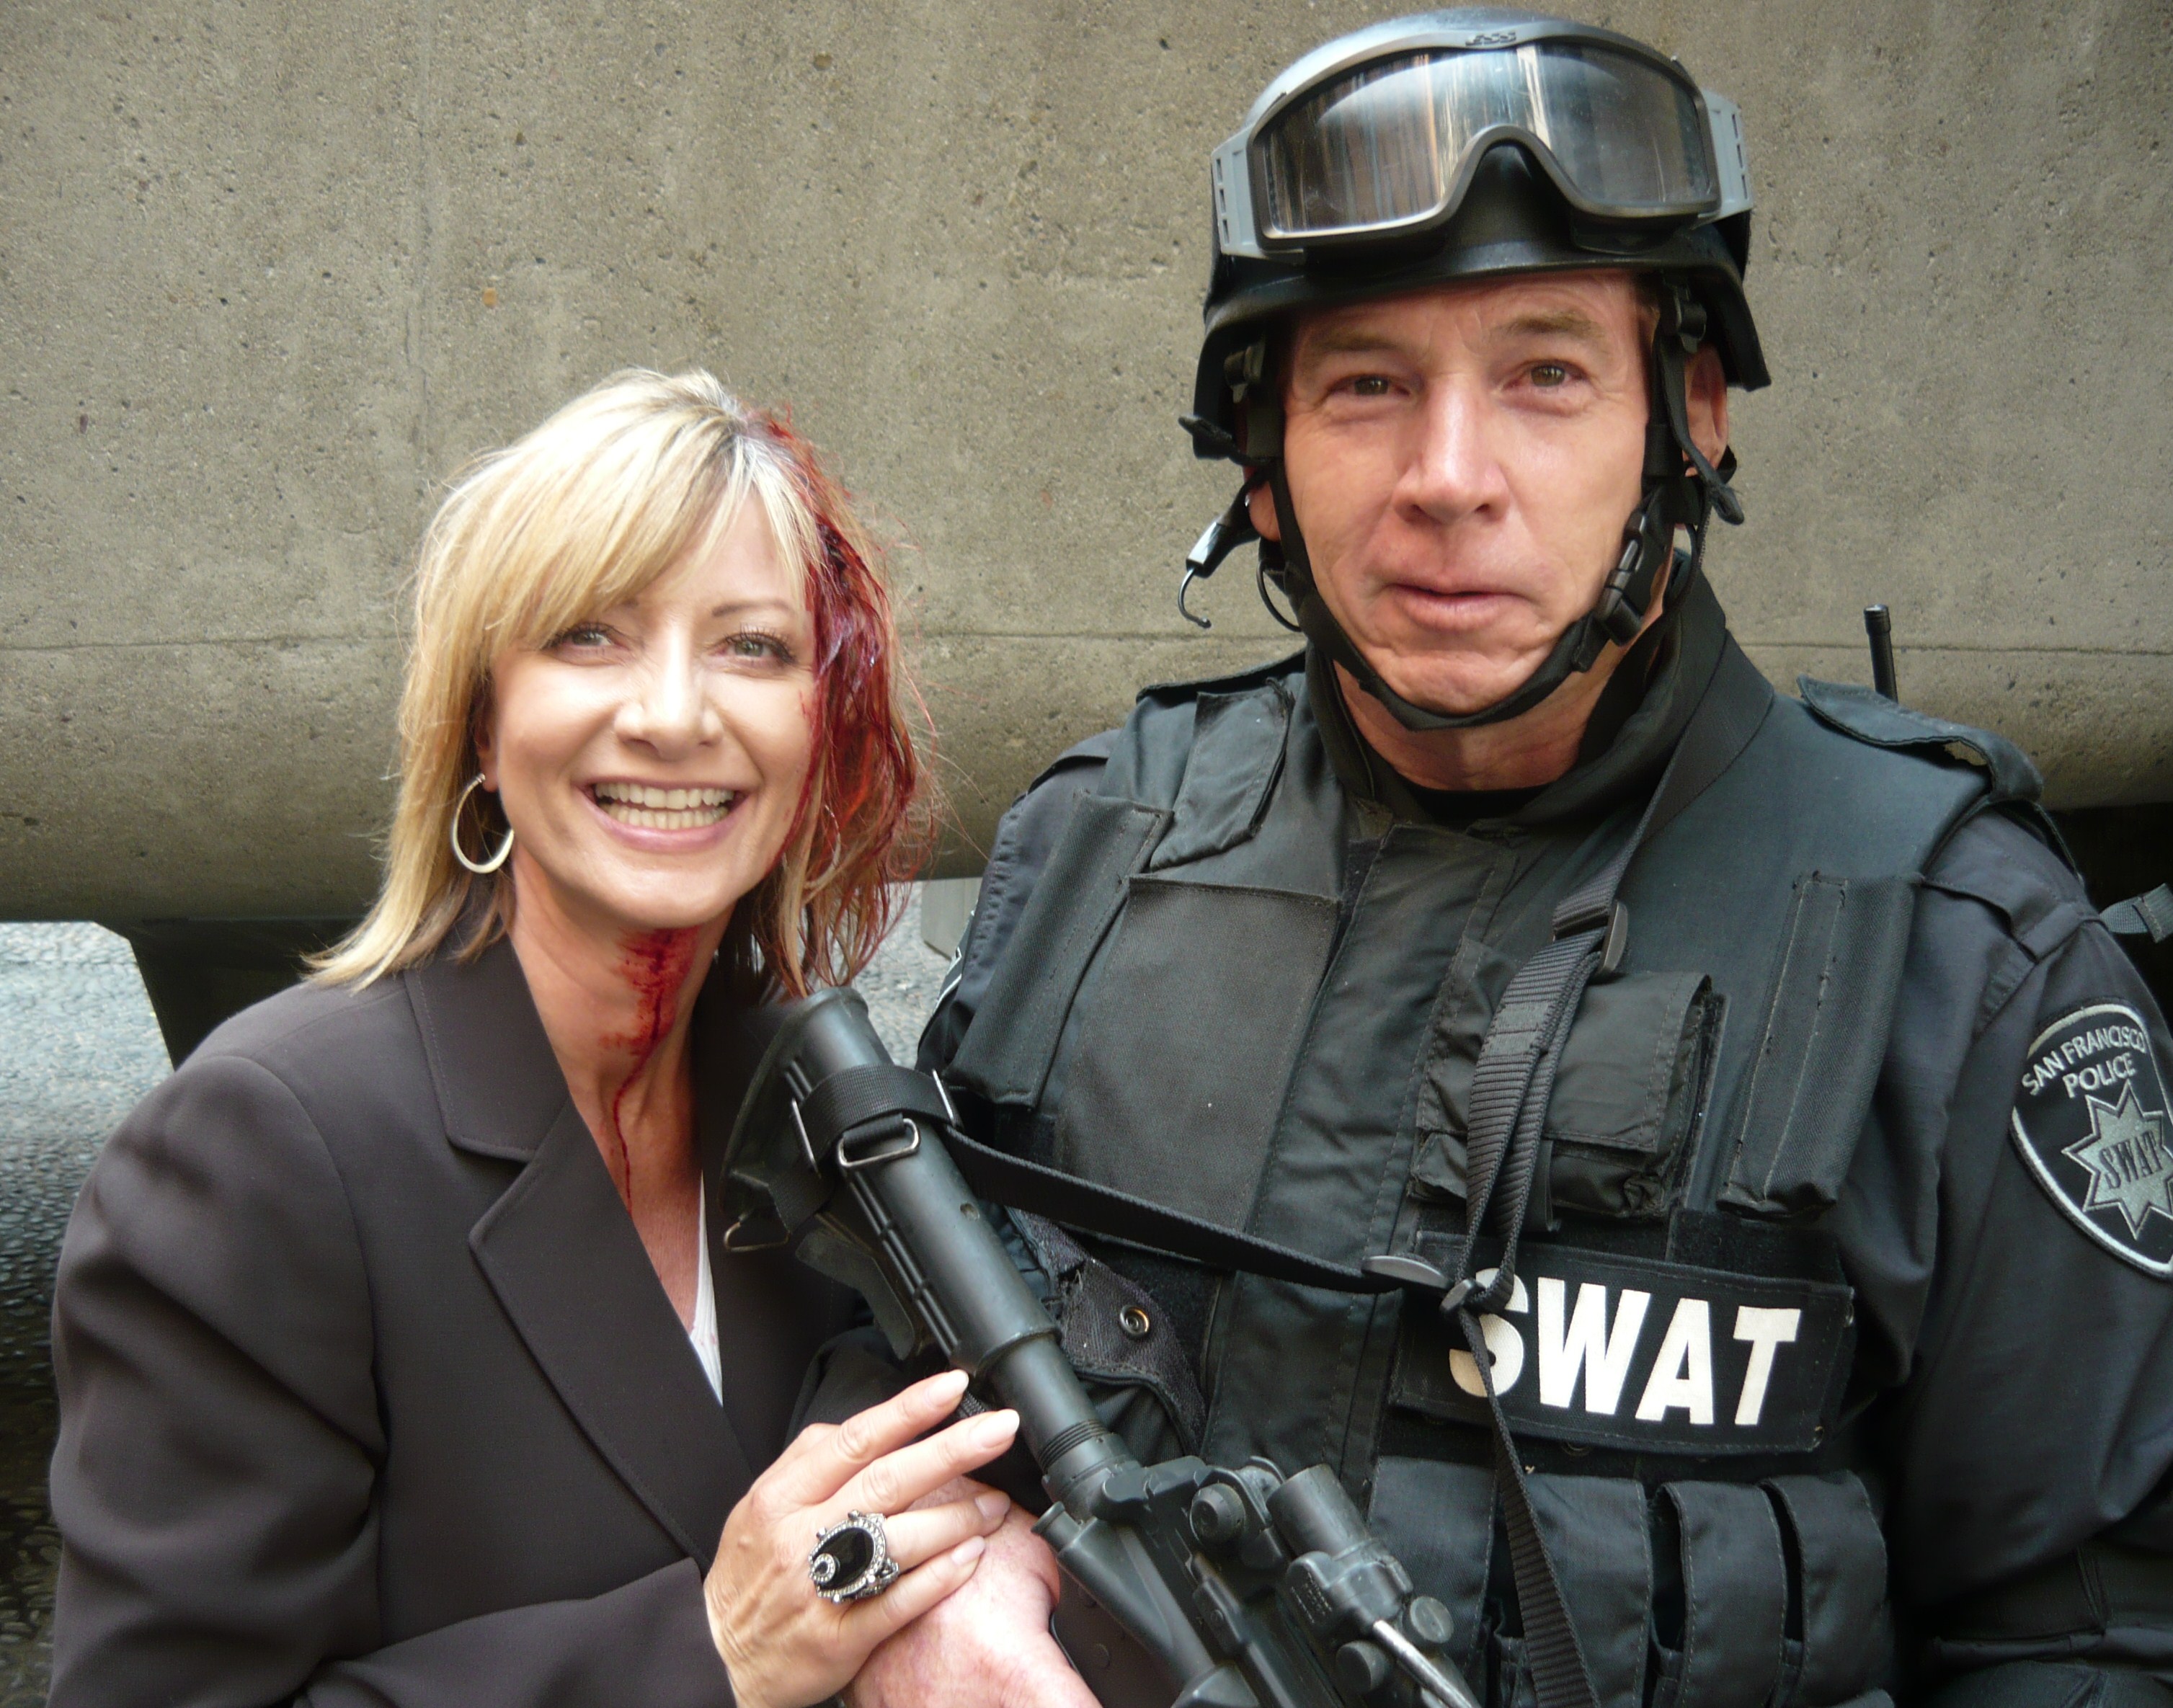 Playing a rescueing SWAT officer with Laurie Steele in Episode 102 of NBC's TRAUMA, filming in Downtown San Francisco